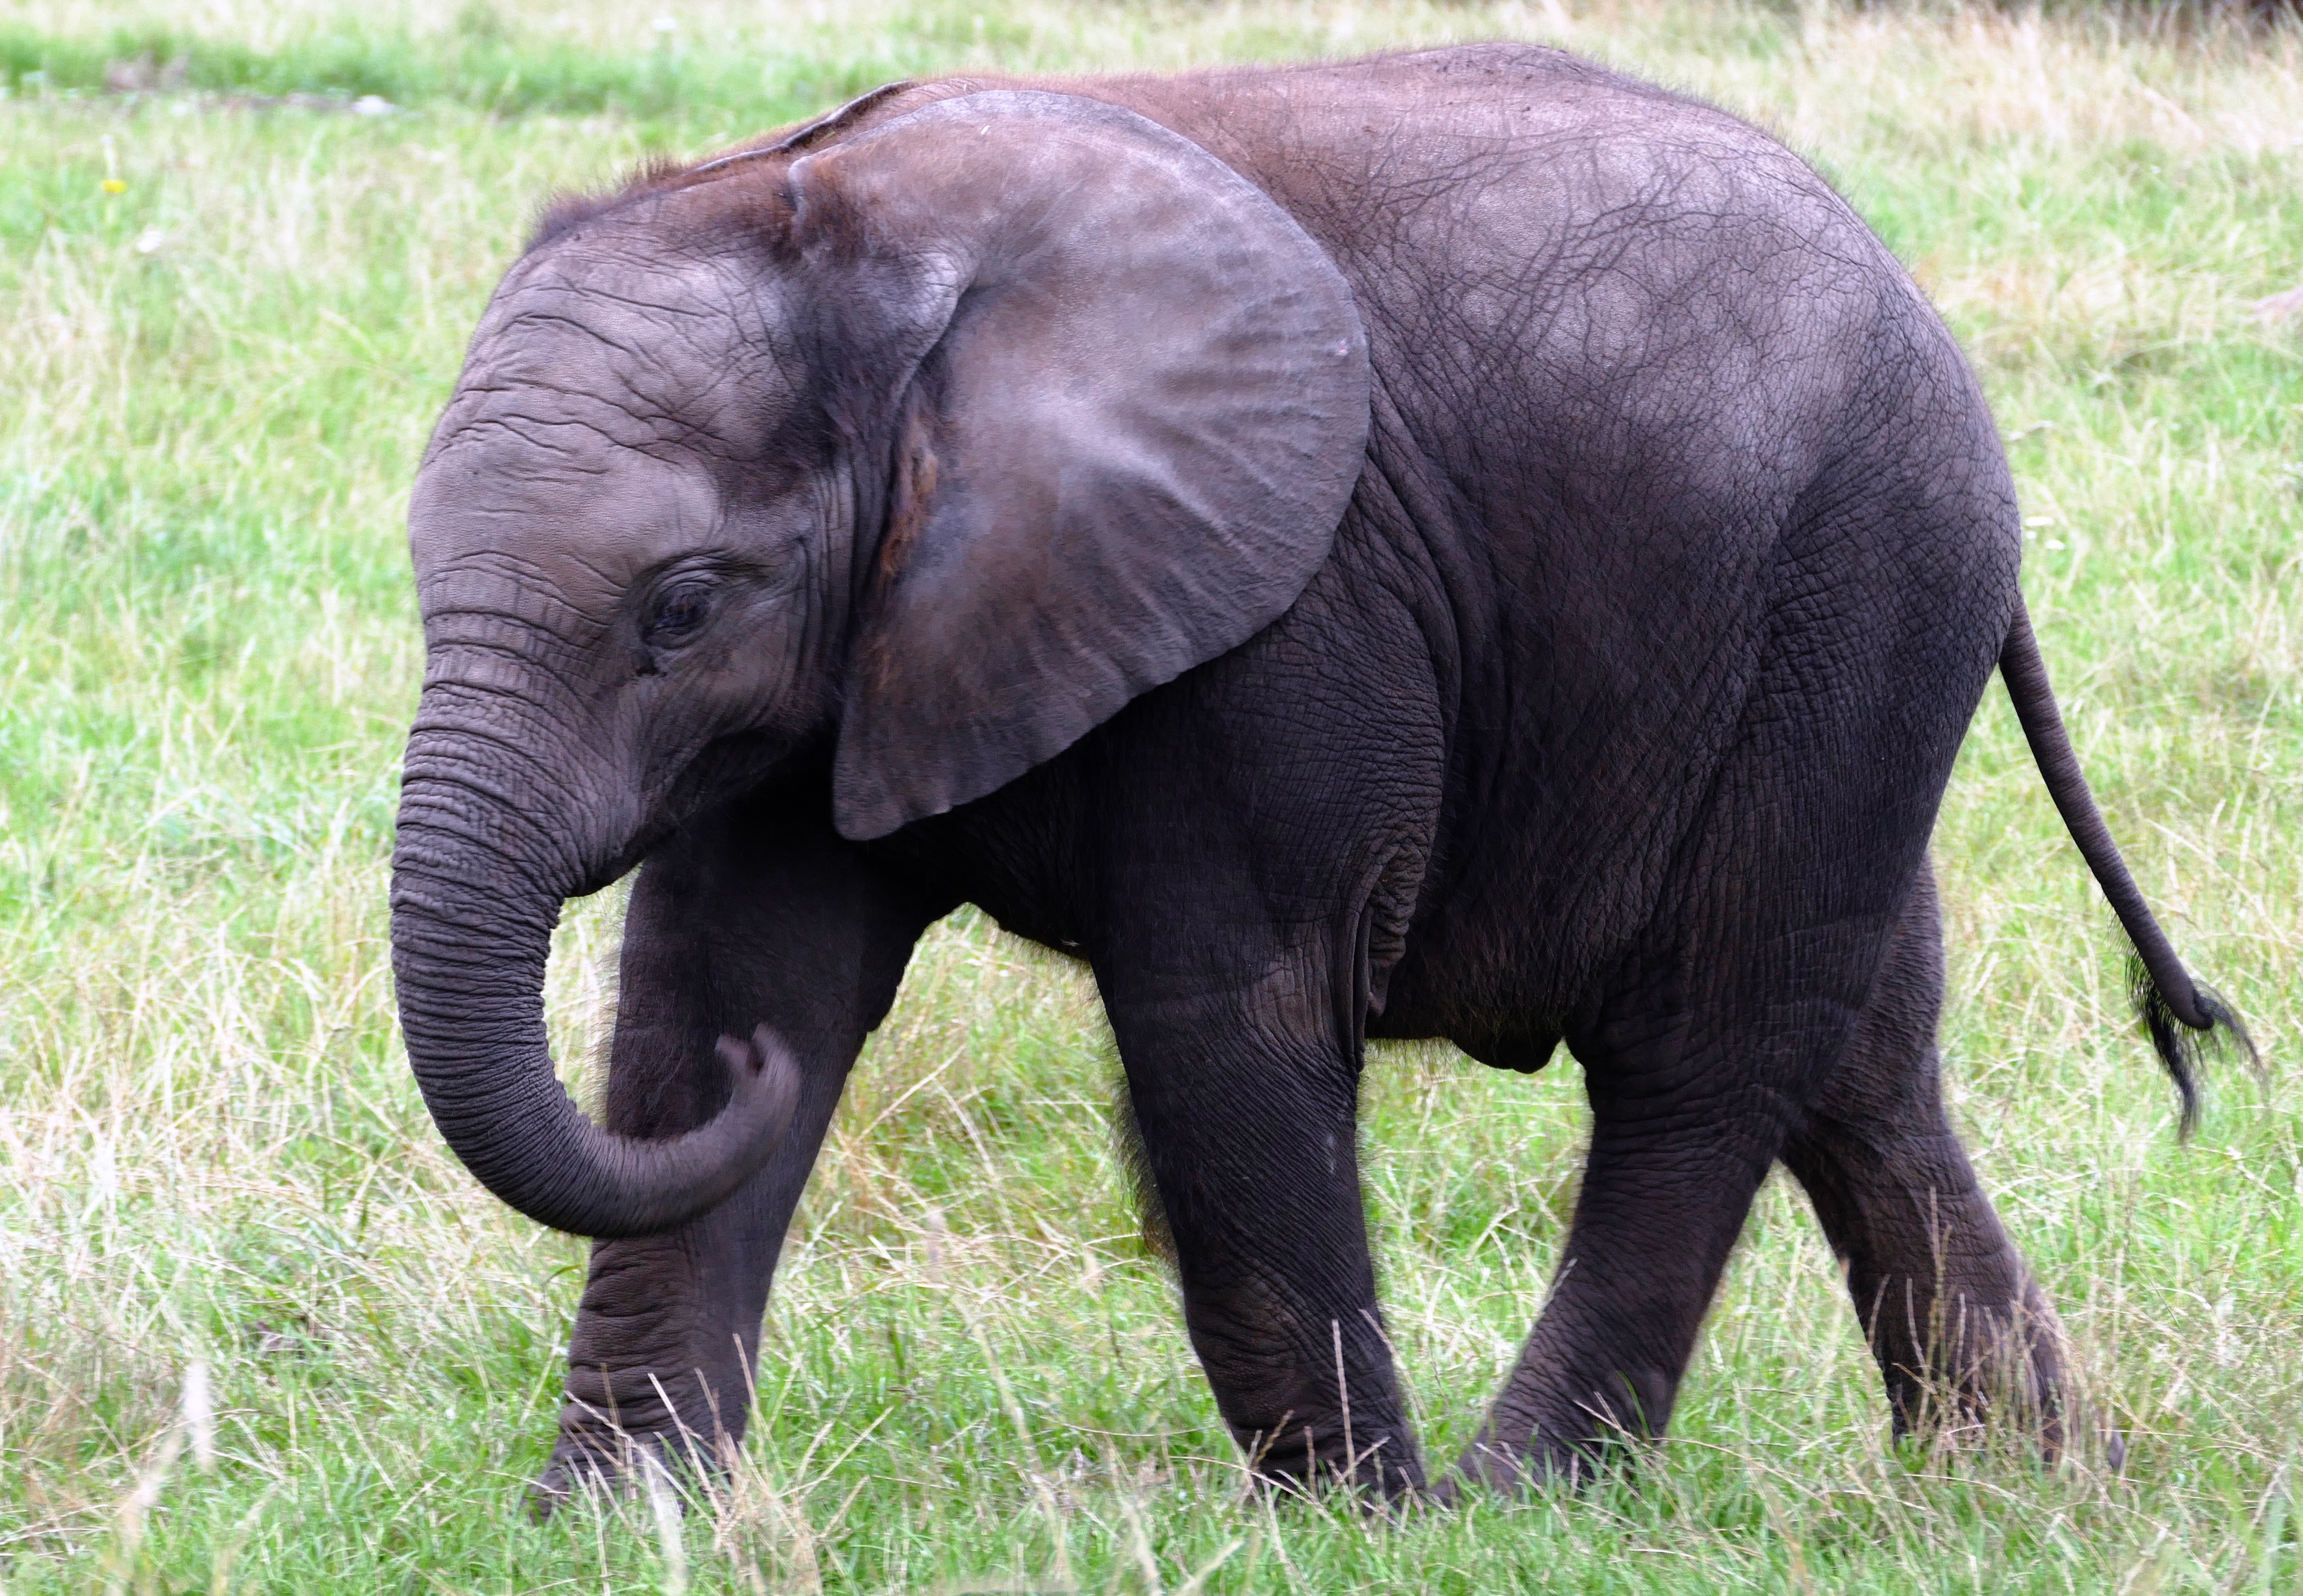 Elephant charity appoints former Jupiter AM veteran as CEO